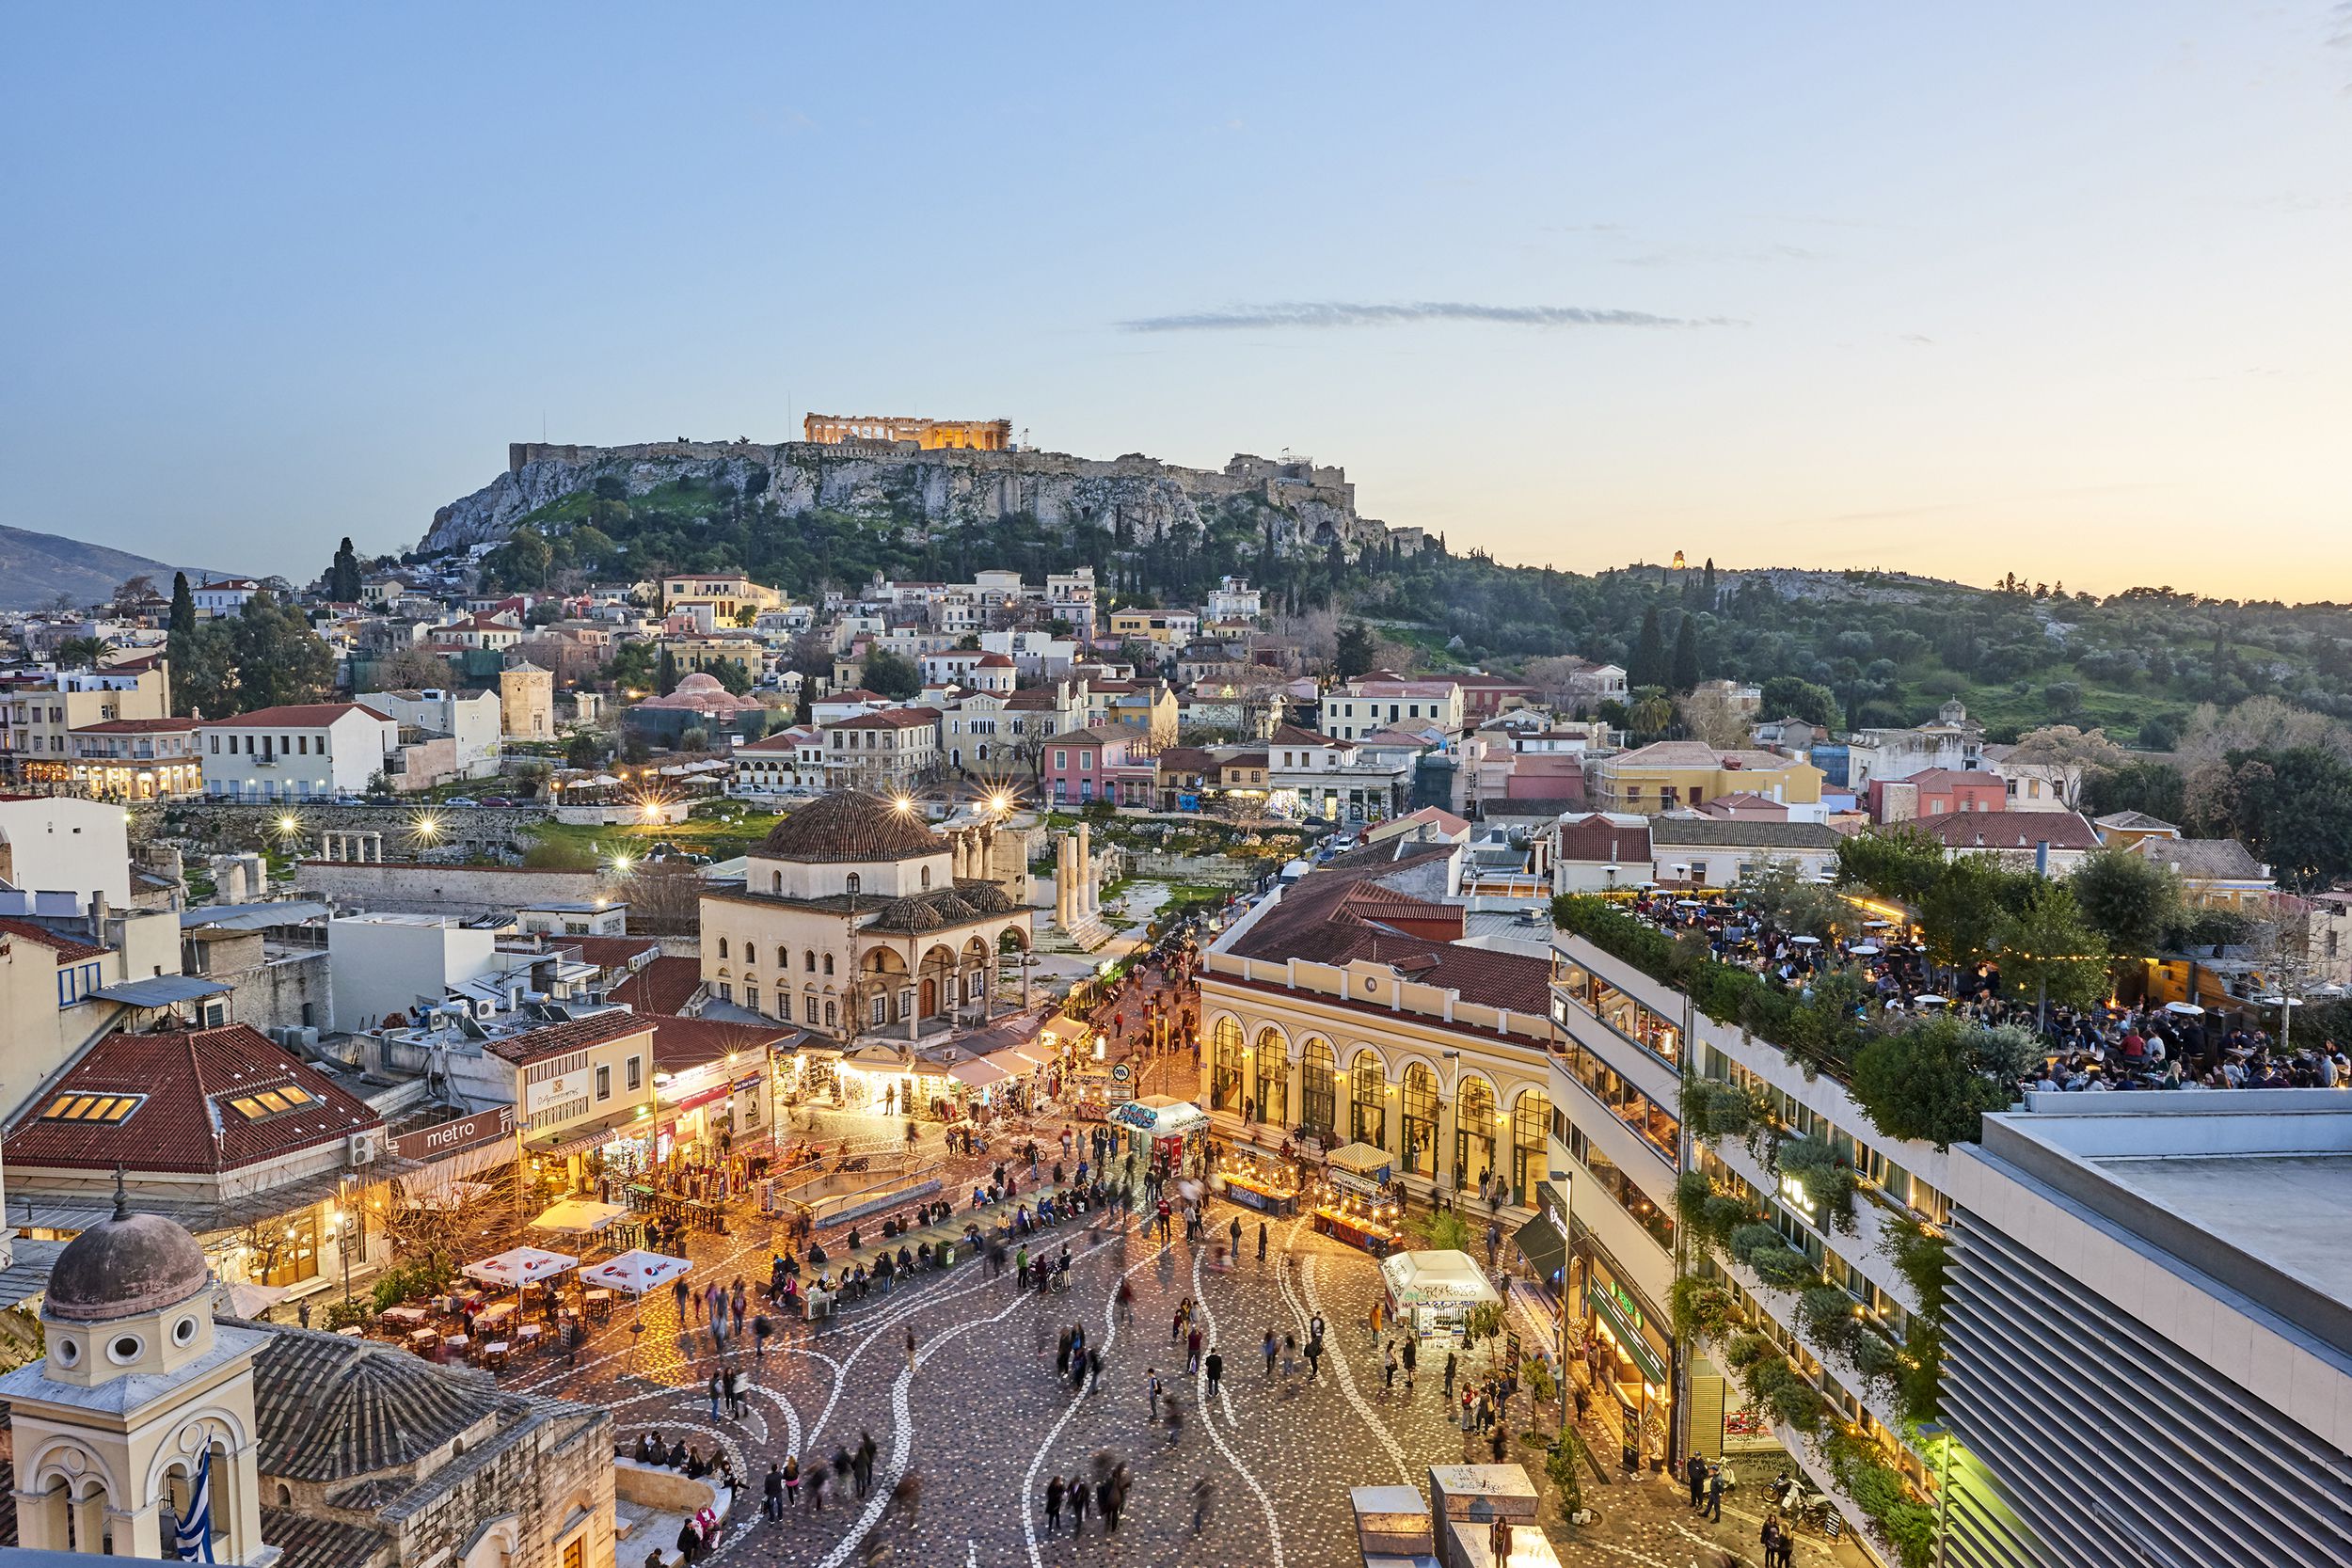 Athens offers a first-hand view of world history for young minds. Kids can travel back to the golden age of Pericles with a visit to the Acropolis and learn about the birthplace of democracy. After visiting the ruins, stop at the <a href="https://www.theacropolismuseum.gr/en/content/family-programs">Acropolis Museum</a>, which showcases the archaeological finds from the famed site. To help engage children even further, the museum even provides backpacks for kids filled with games, activities and a family trail map that leads kids through the museum.